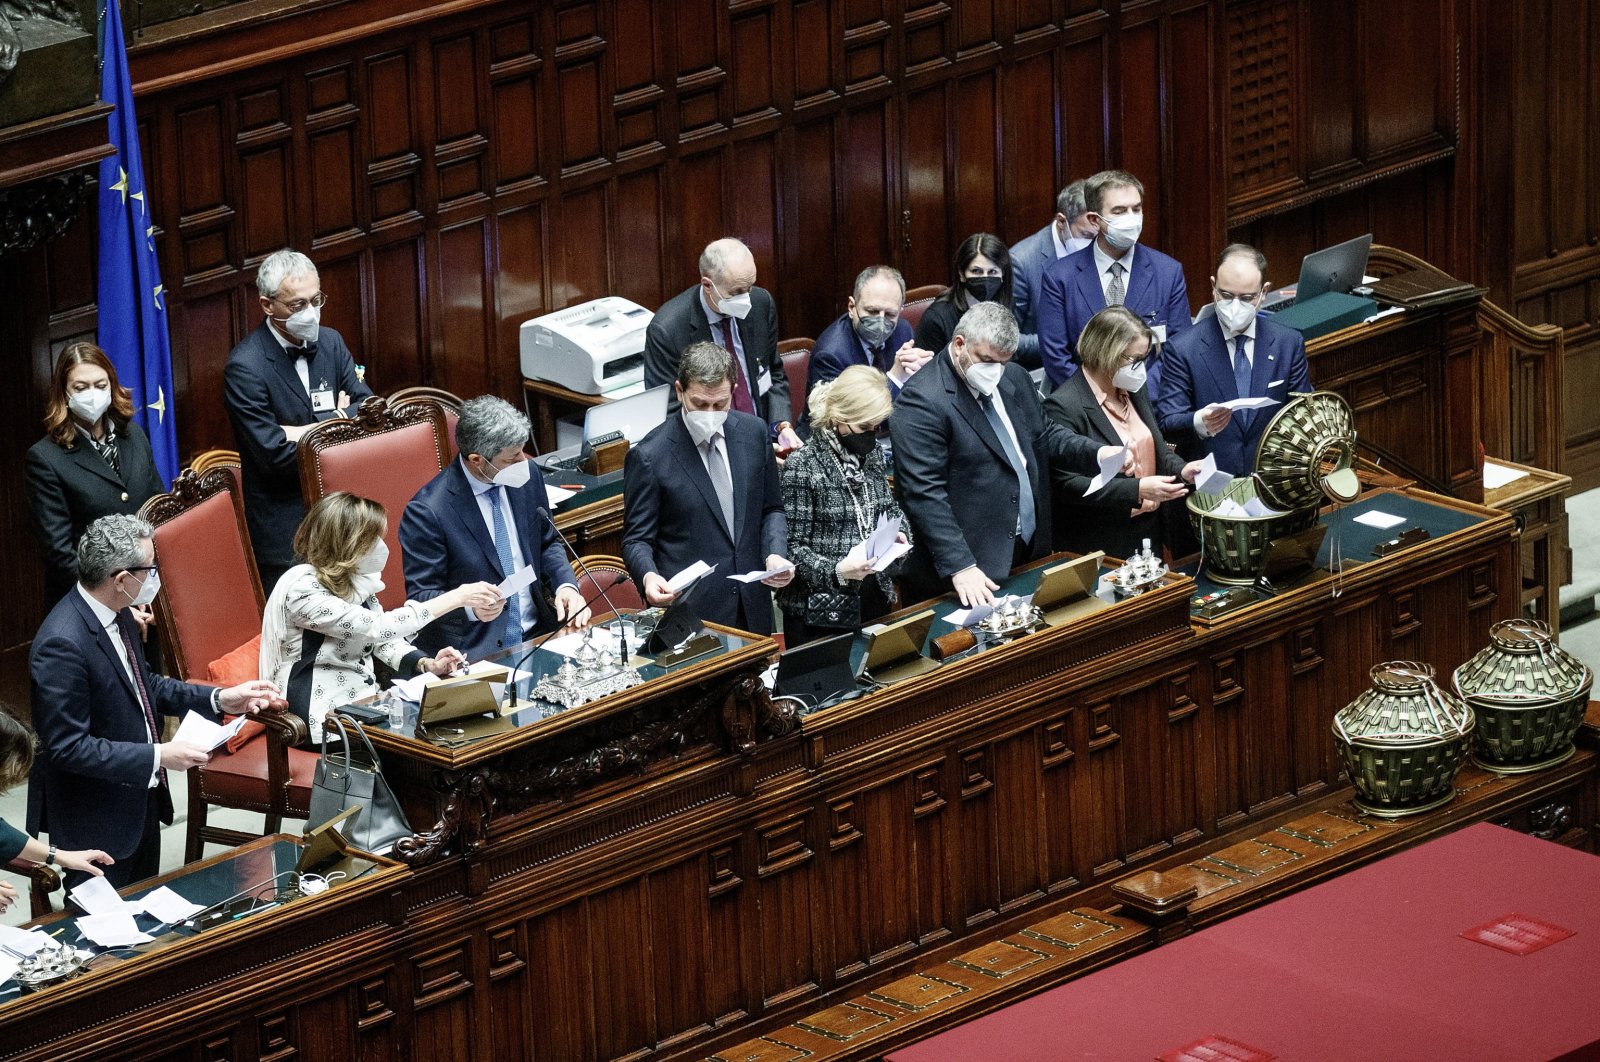  President of the Senate Maria Elisabetta Alberti Casellati and president of the Chamber of Deputies Roberto Fico during the counting of the ballots at the Lower House (Chamber of Deputies), in Rome, Italy, Jan. 29, 2022. (EPA Photo)